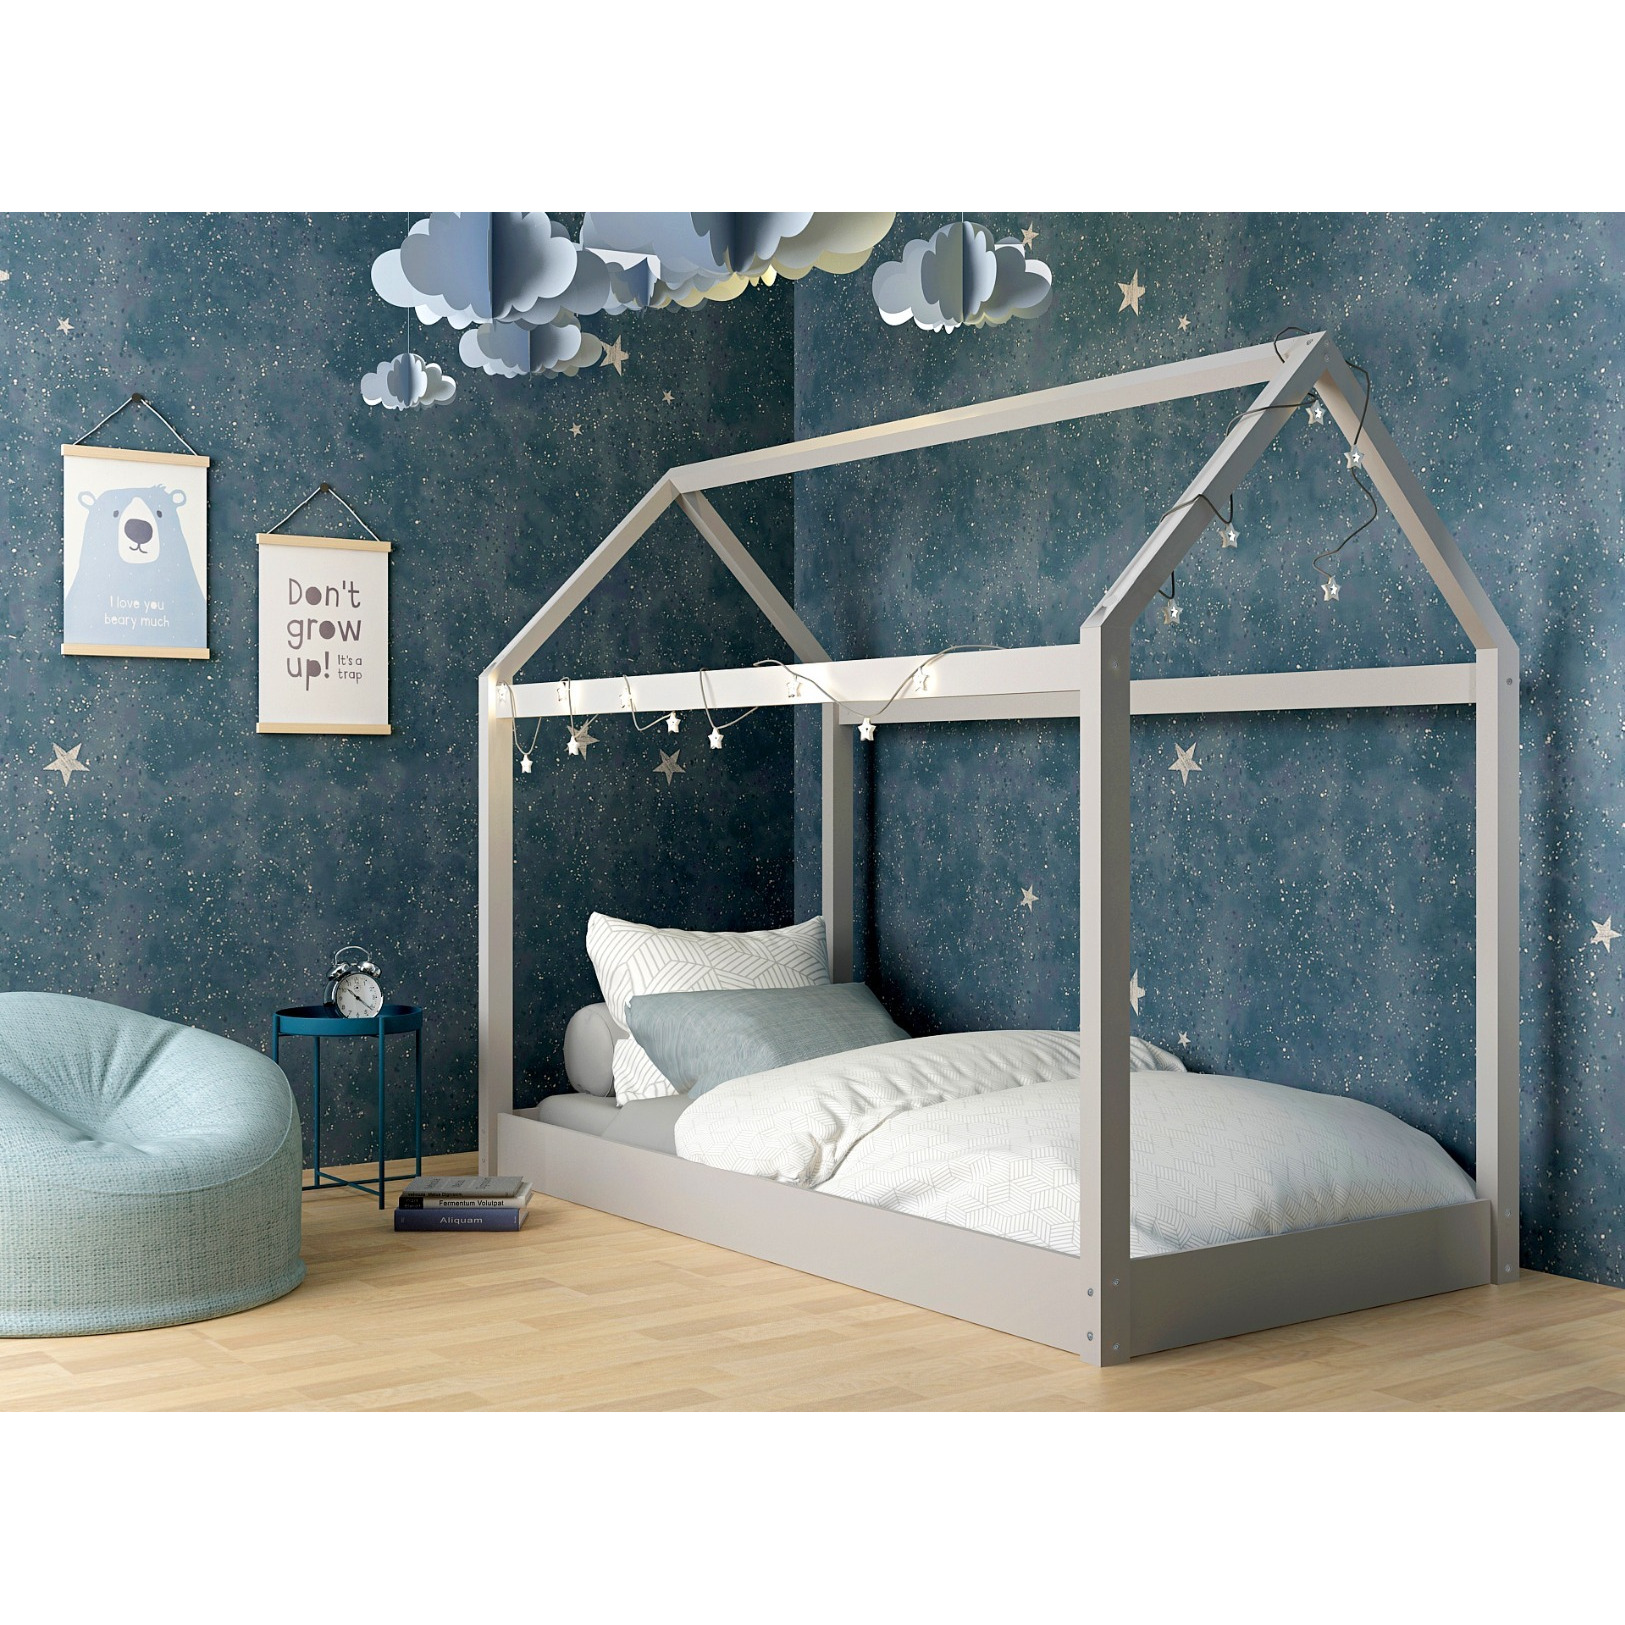 LPD Hickory Single Bed Frame Grey - image 1